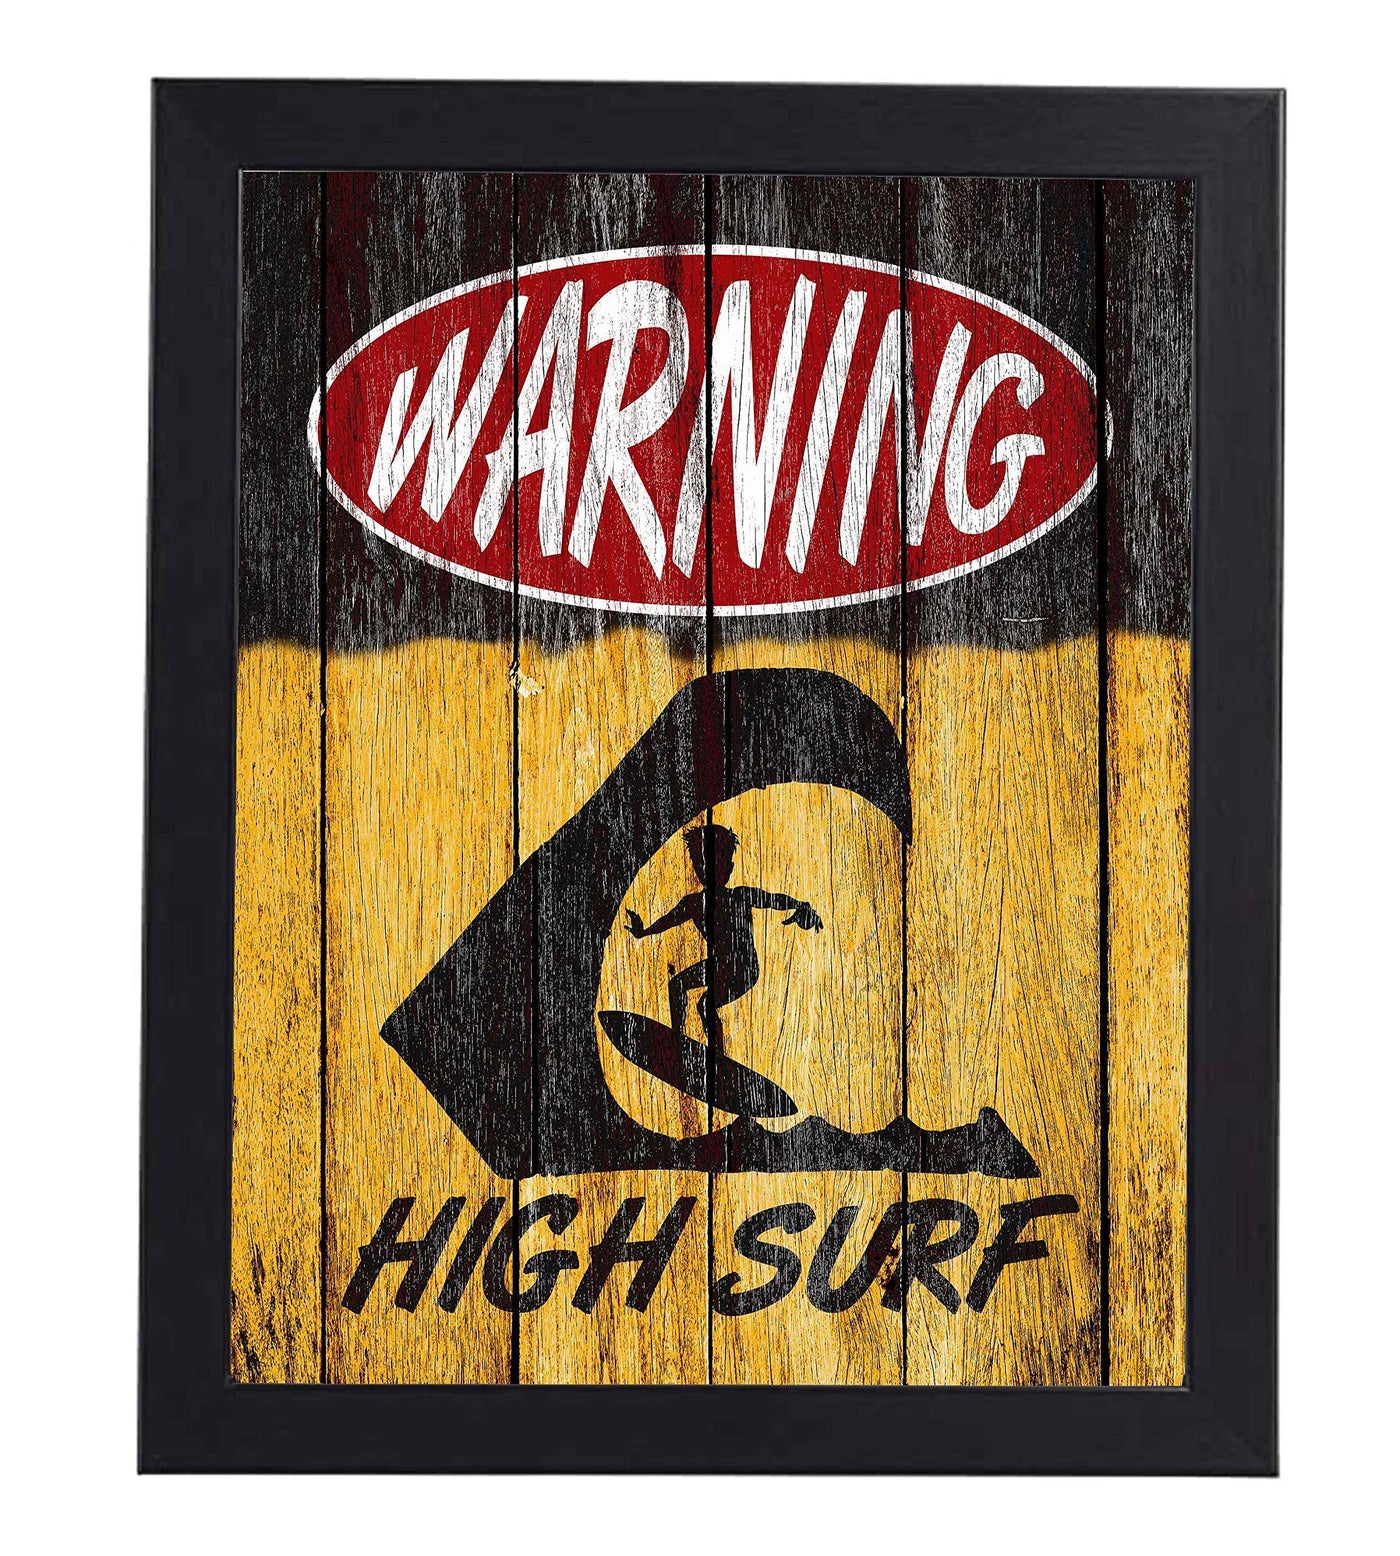 Warning-High Surf Fun Beach Sign -8 x 10" Wall Decor Print-Ready to Frame. Surfing Themed Art Print w/Distressed Wood Design. Vintage Home-Patio-Beach House-Surfboard Decor. Great Gift-Hang Ten!